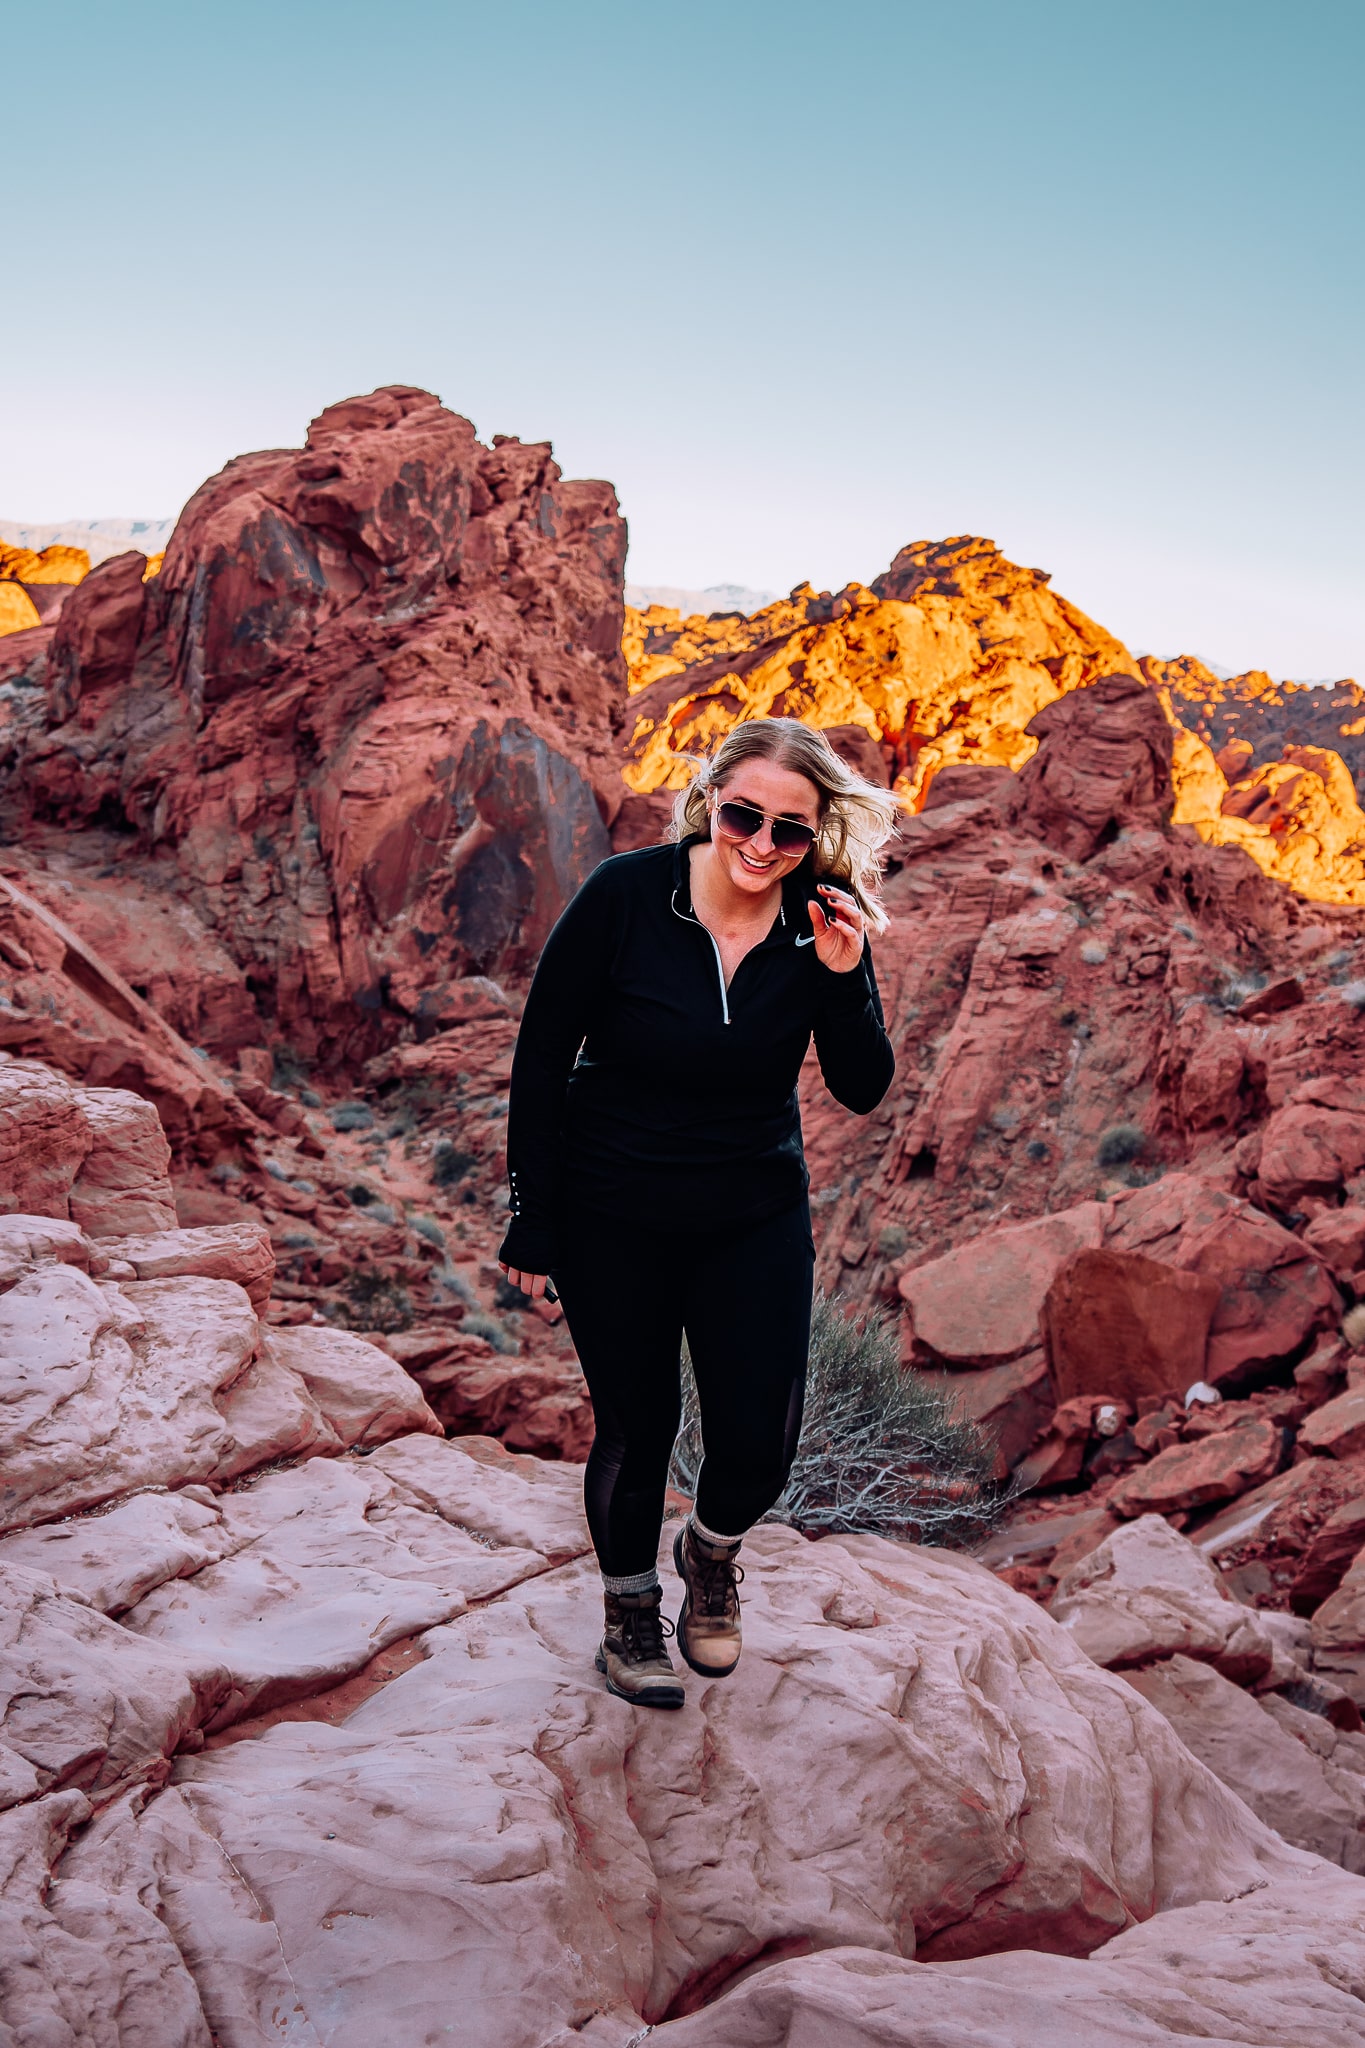 Woman standing on the ledge with a bunch of red rocks in the back in Valley of Fire State Park